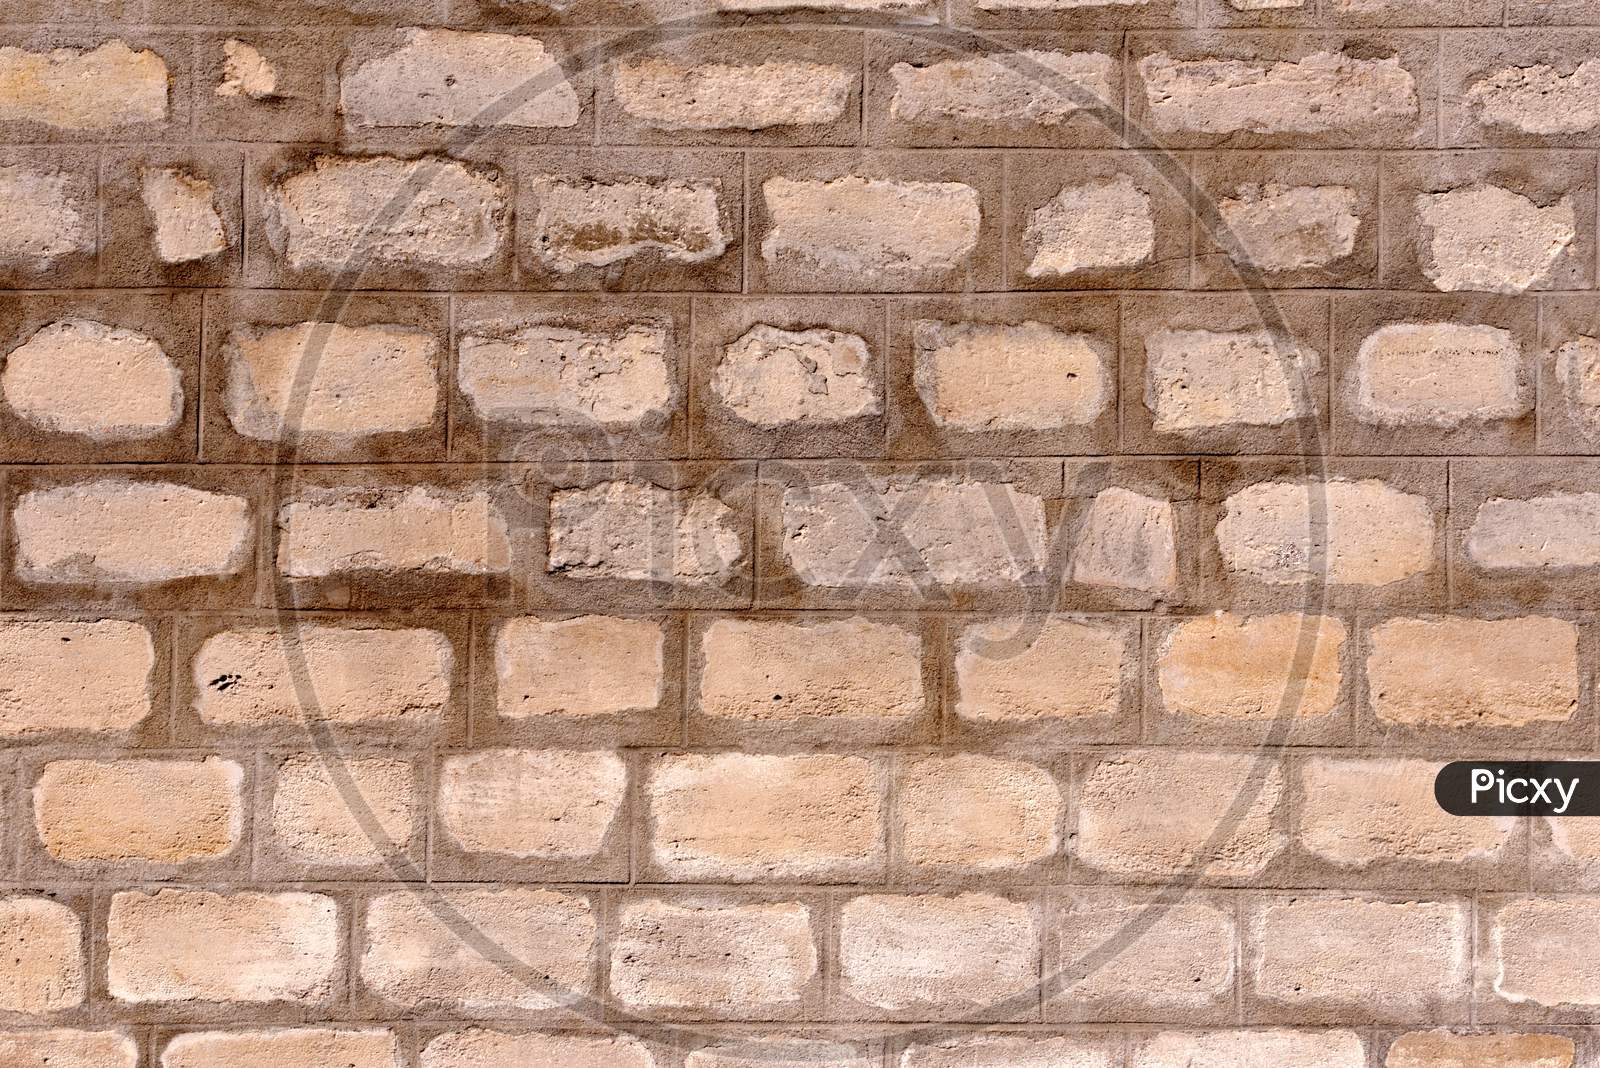 A Brown Cemented Wall Made Up Of Visible Bricks Attached With Wet Cement